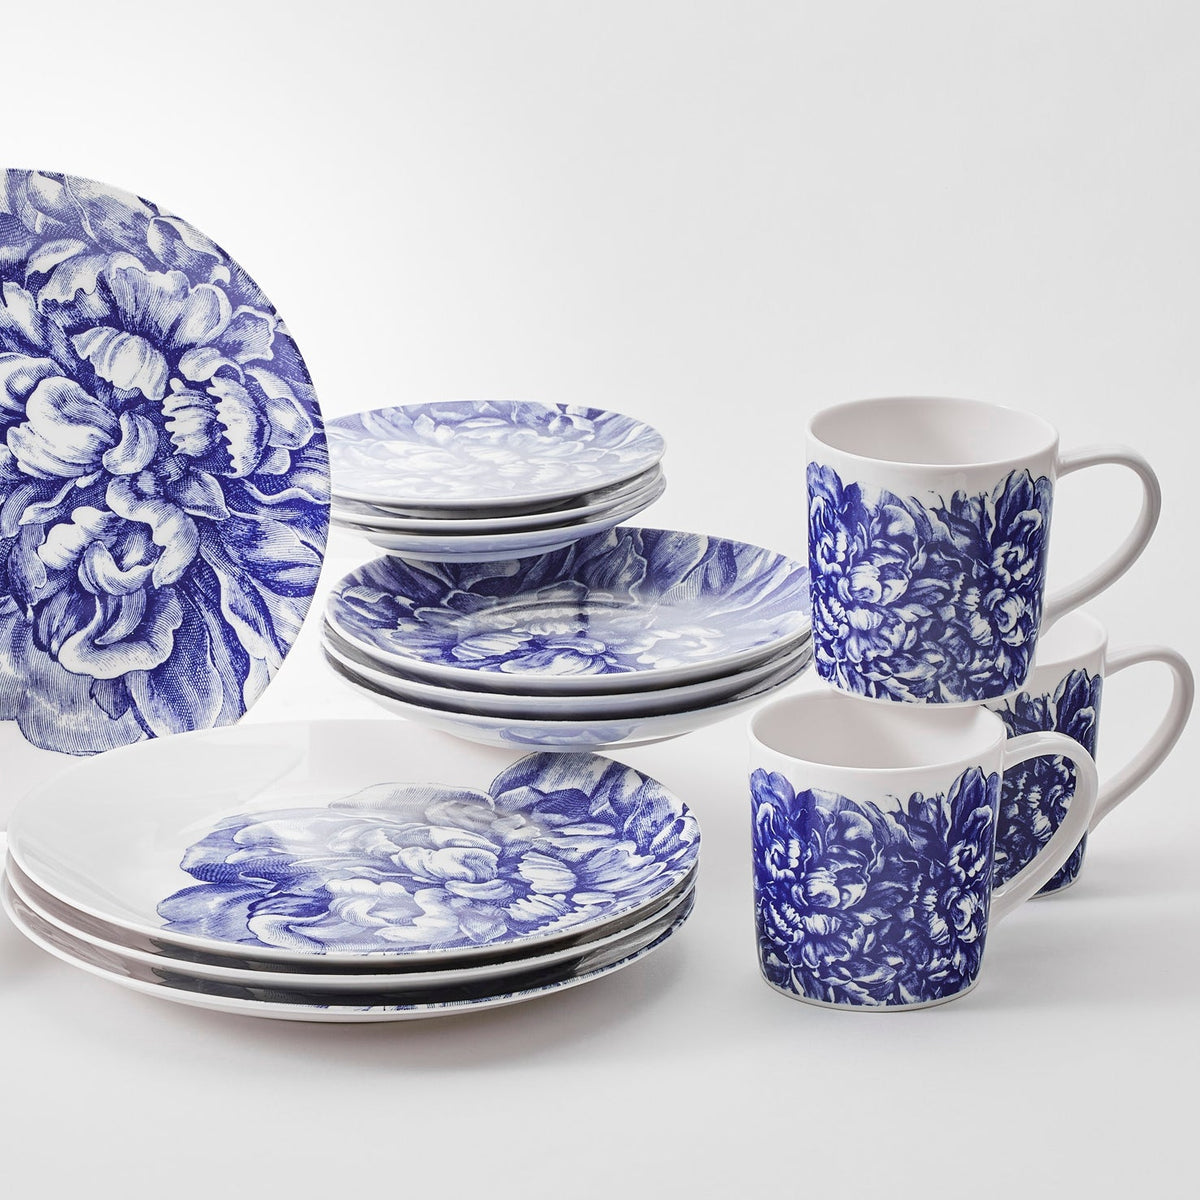 A set of Peony Table for 4 porcelain dinnerware by Caskata.